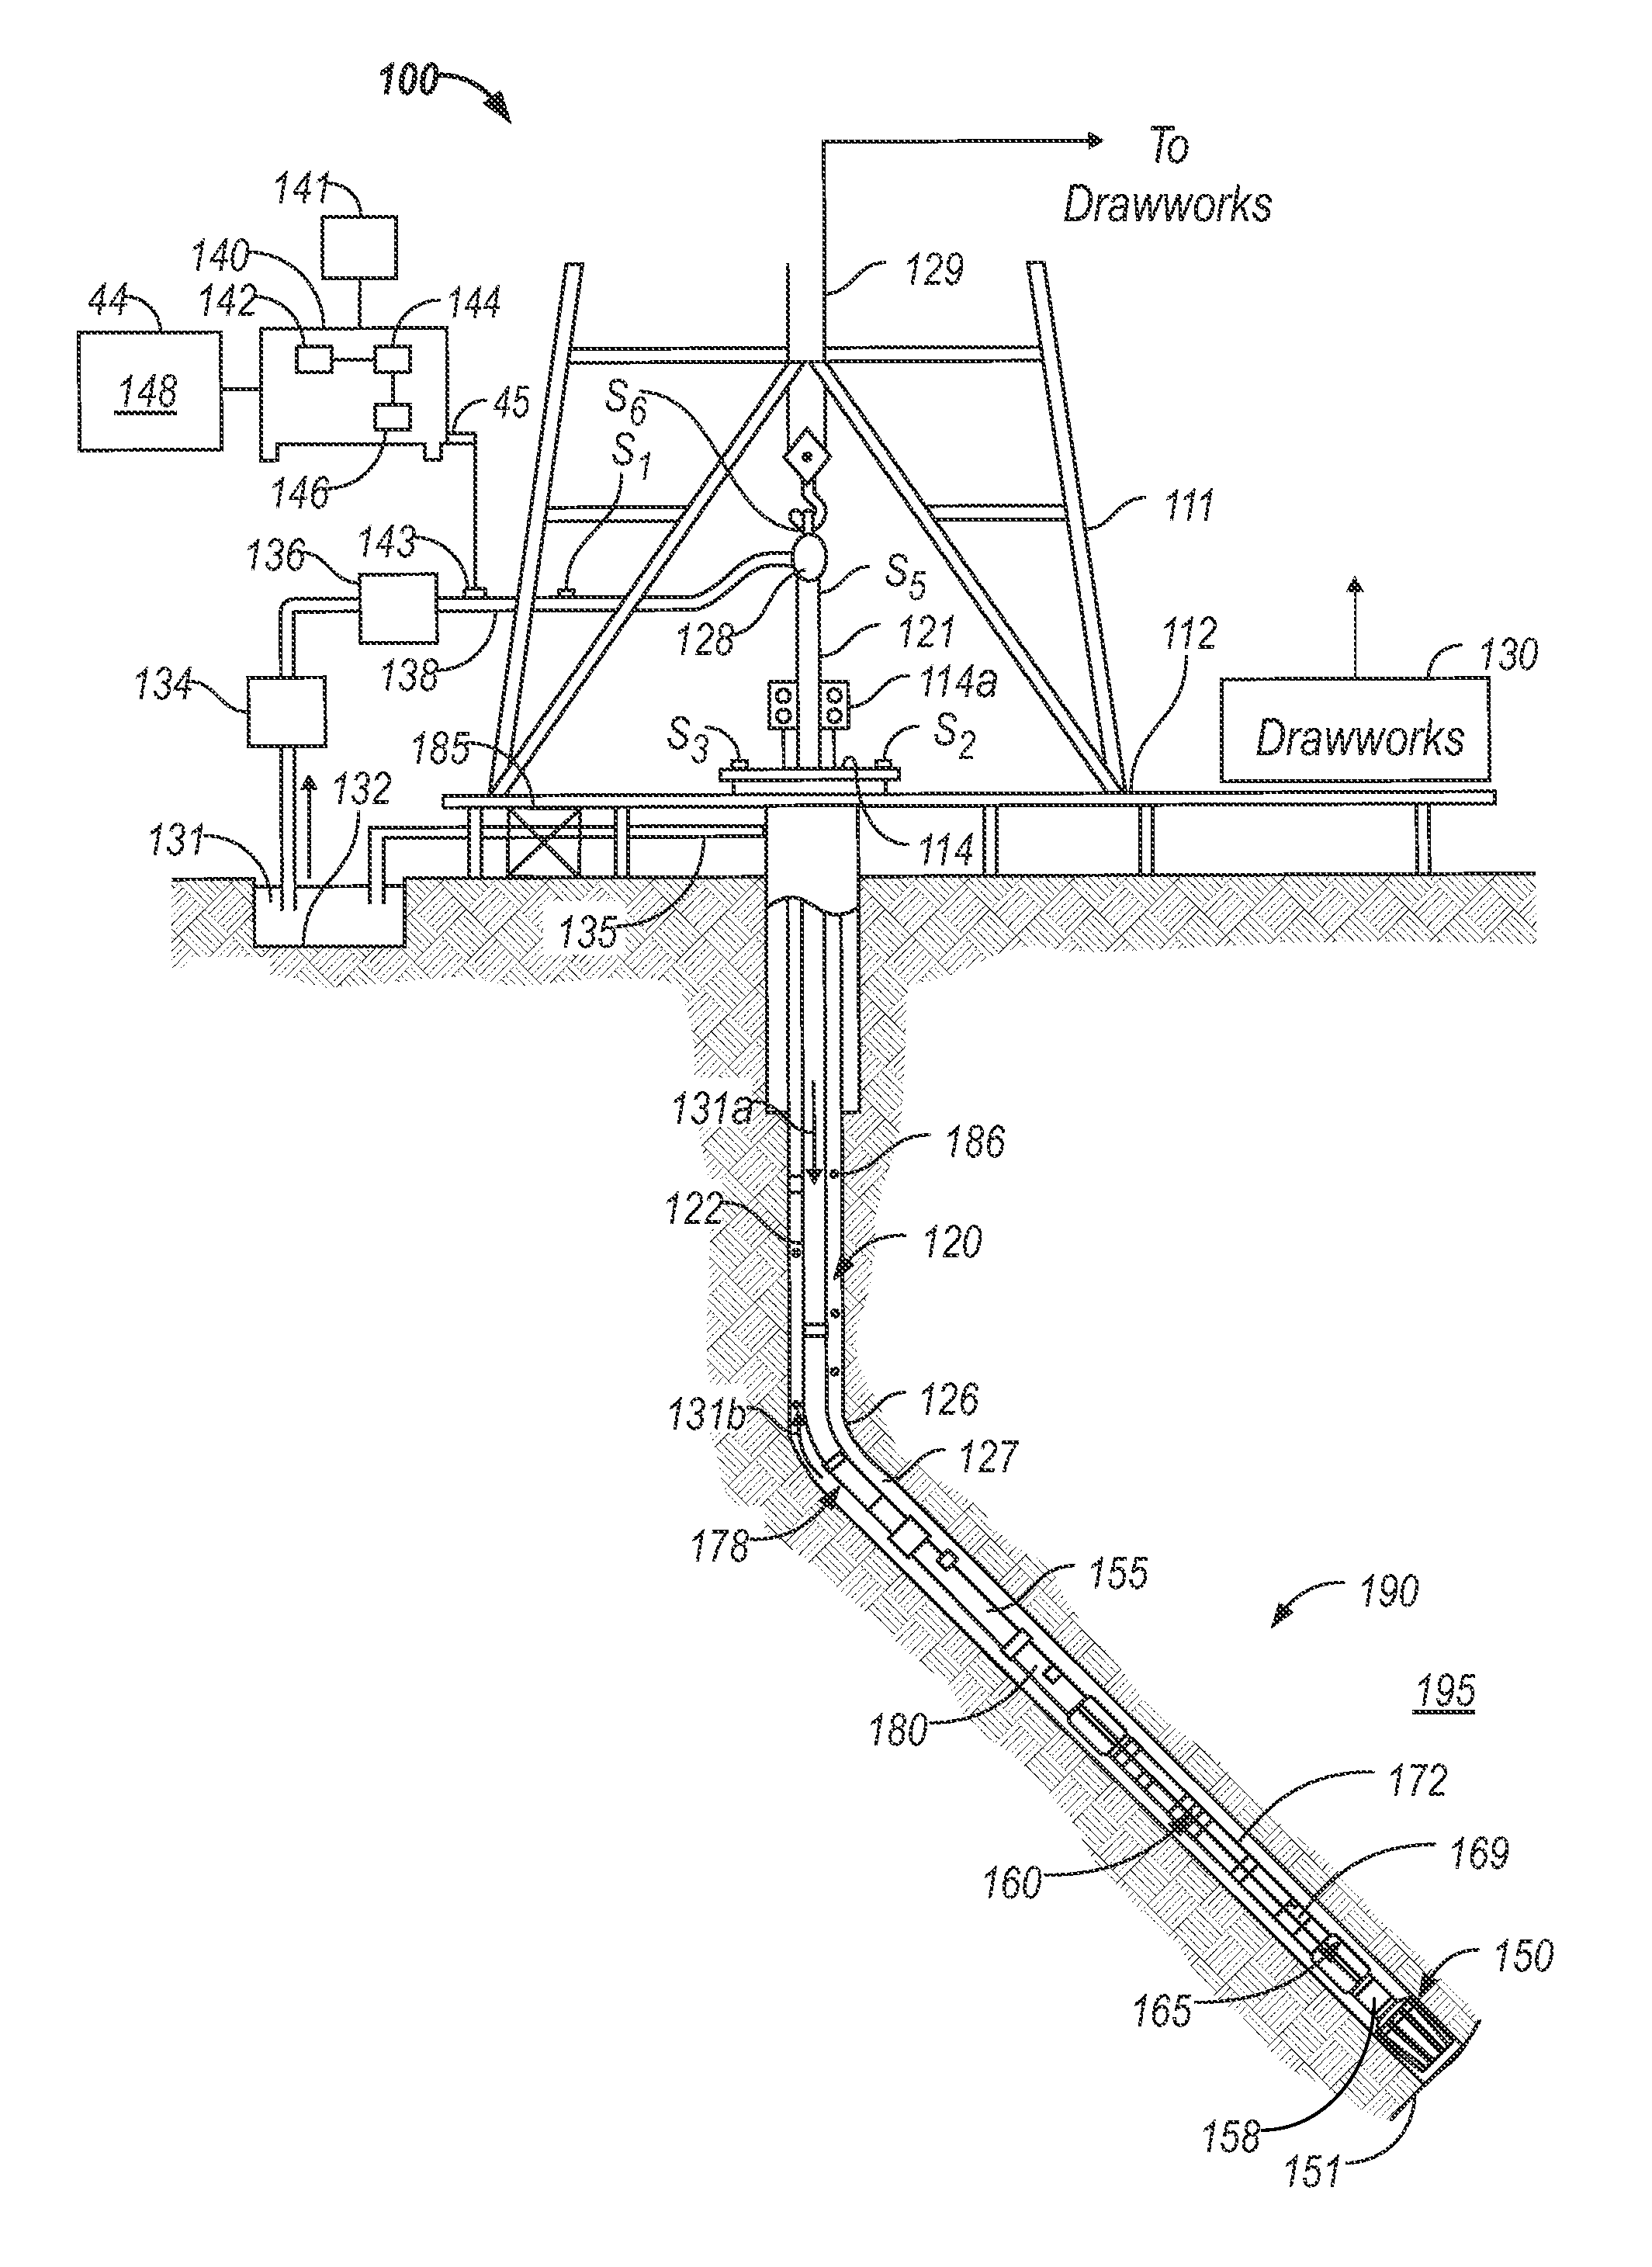 Steering Head with Integrated Drilling Dynamics Control